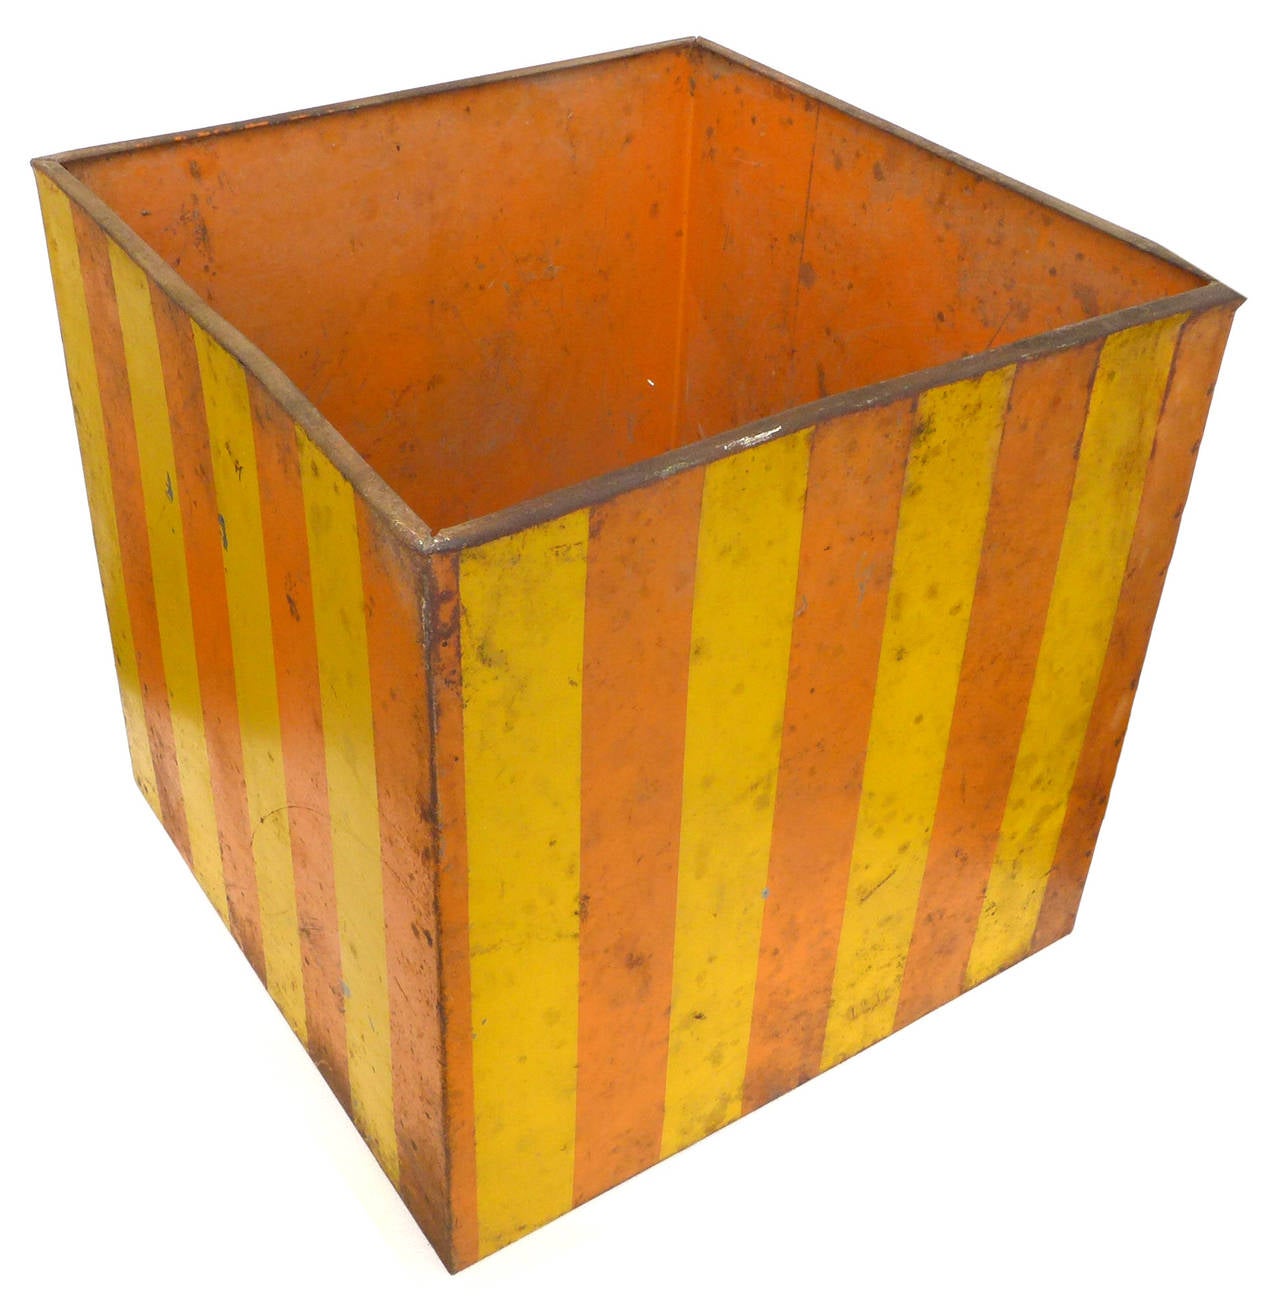 A wonderfully graphic and unusual painted metal box planter that was used by Tony Duquette in one of his Los Angeles interiors. Alternating vertical stripes of orange and yellow create a strong visual effect. Fantastic patina and surface loaded with